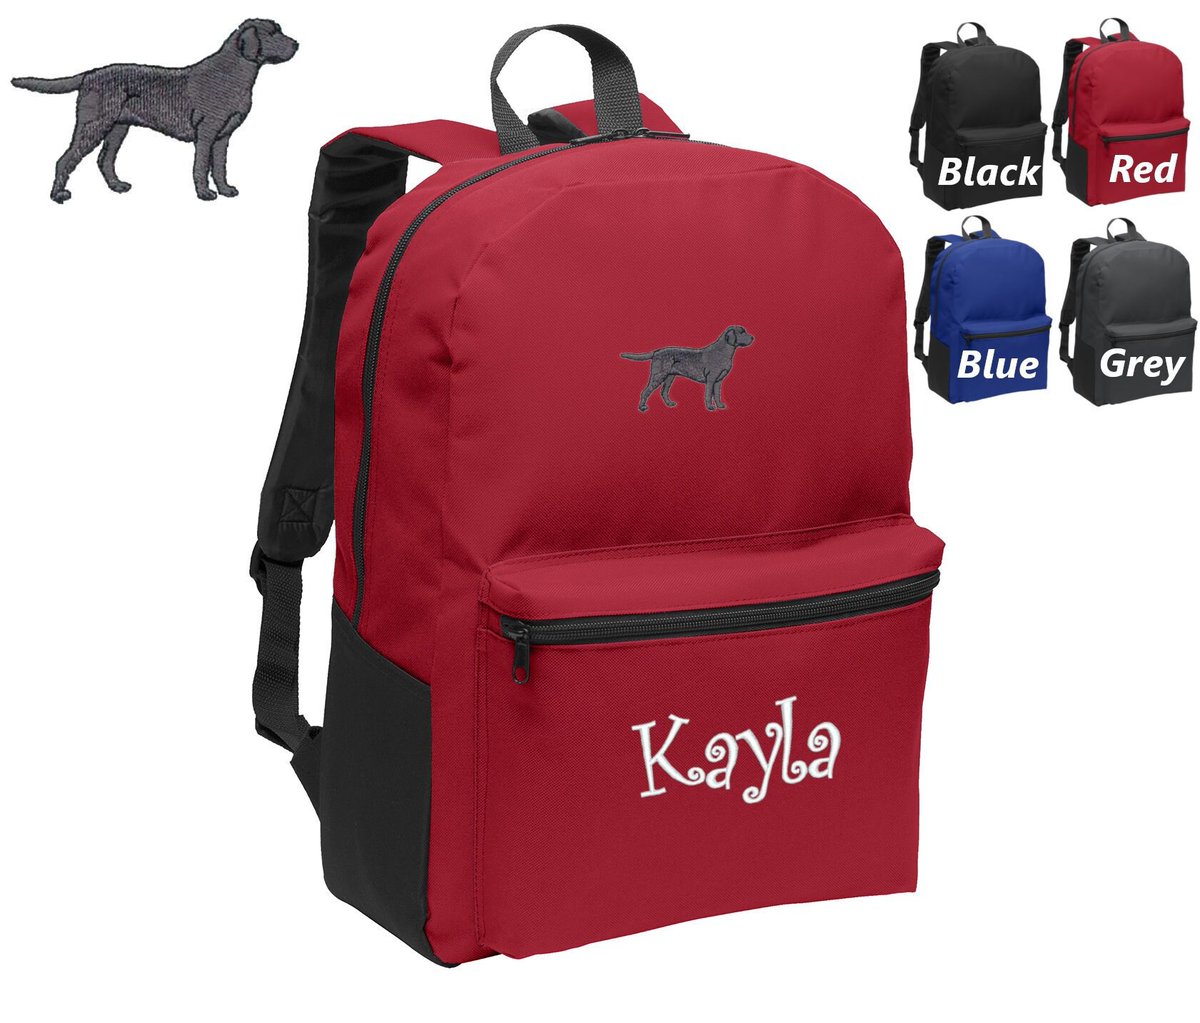 Personalized Kids Backpack Embroidered Labrador Retiever Dog Monogrammed with Name of Your Choice Perfect Kids School Gift etsy.com/listing/676238…
 #BoysGift #personalized